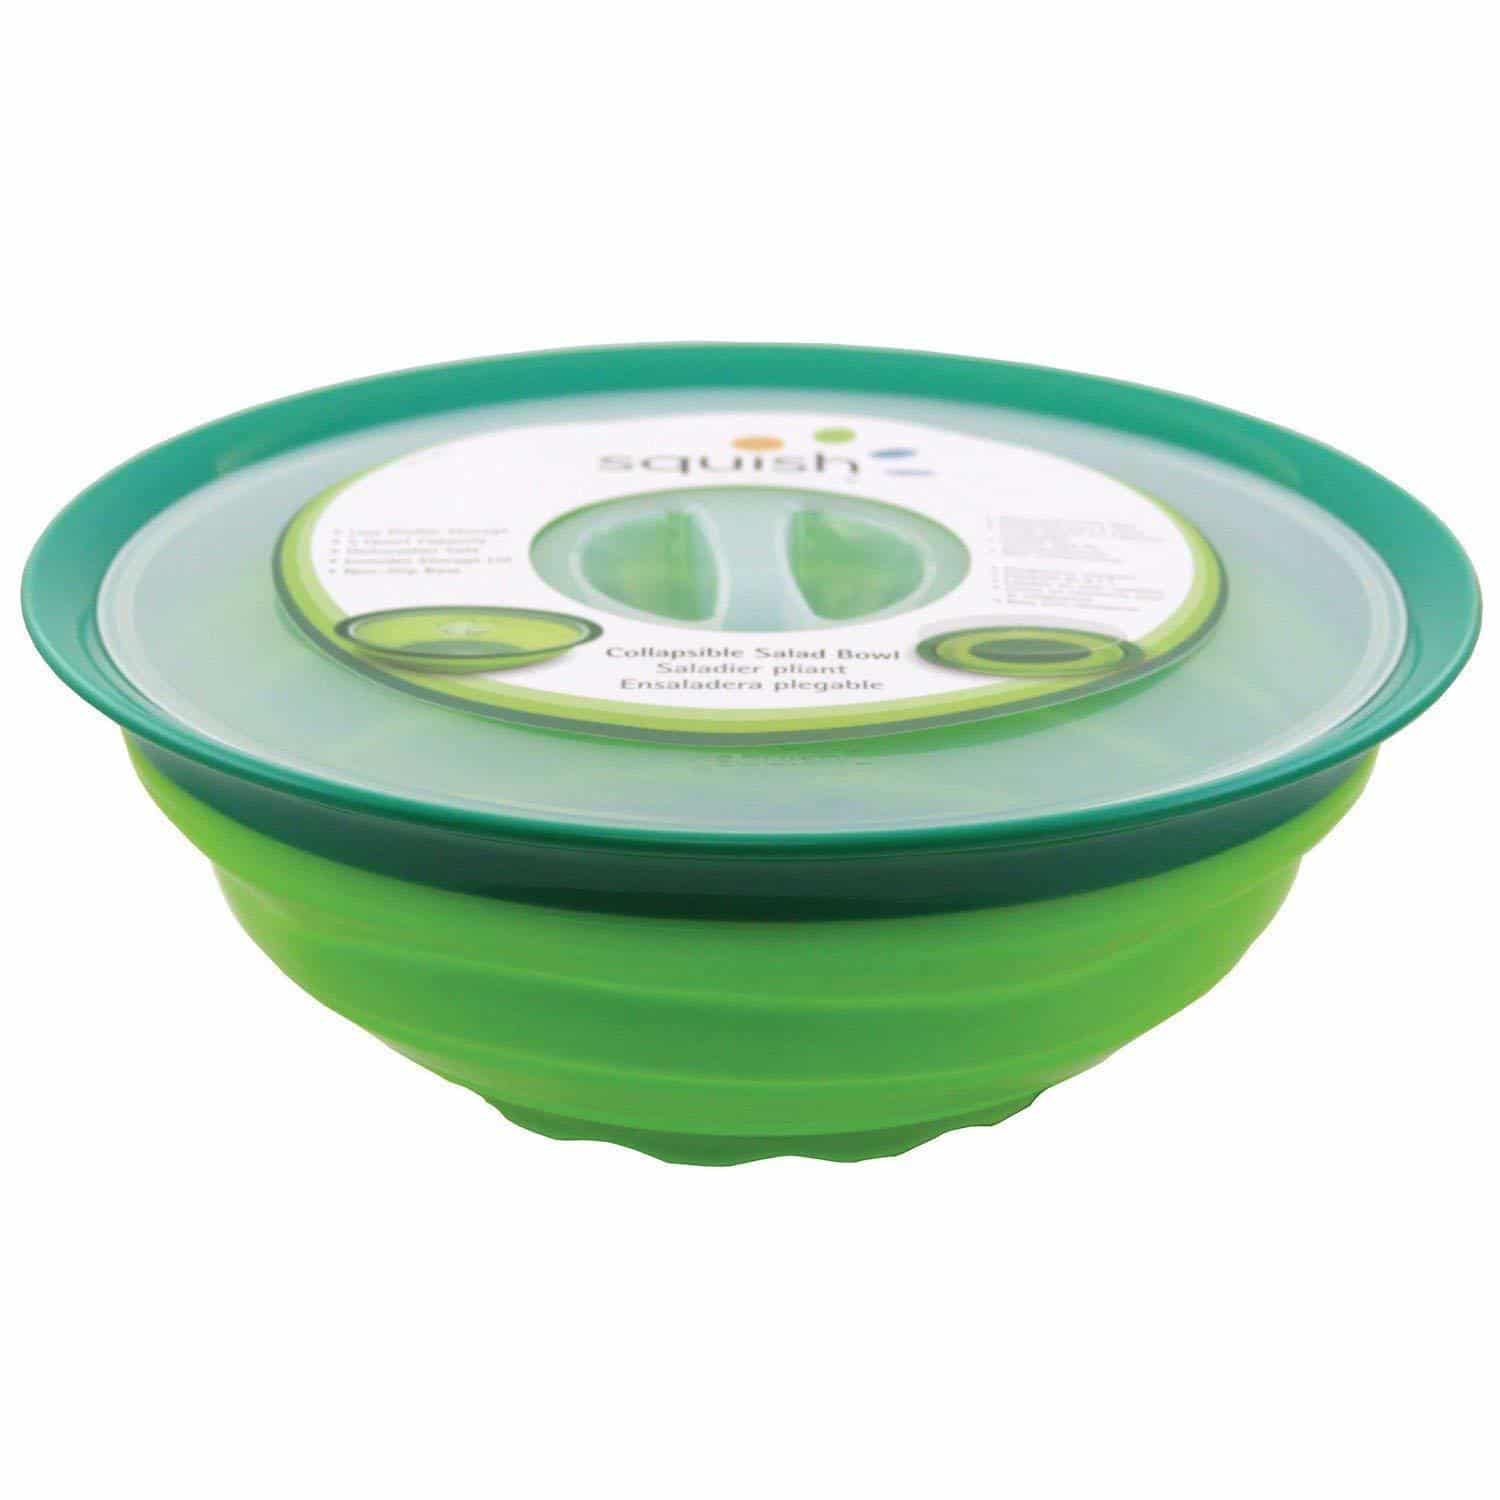 Squish Collapsible Salad Bowl with Lid